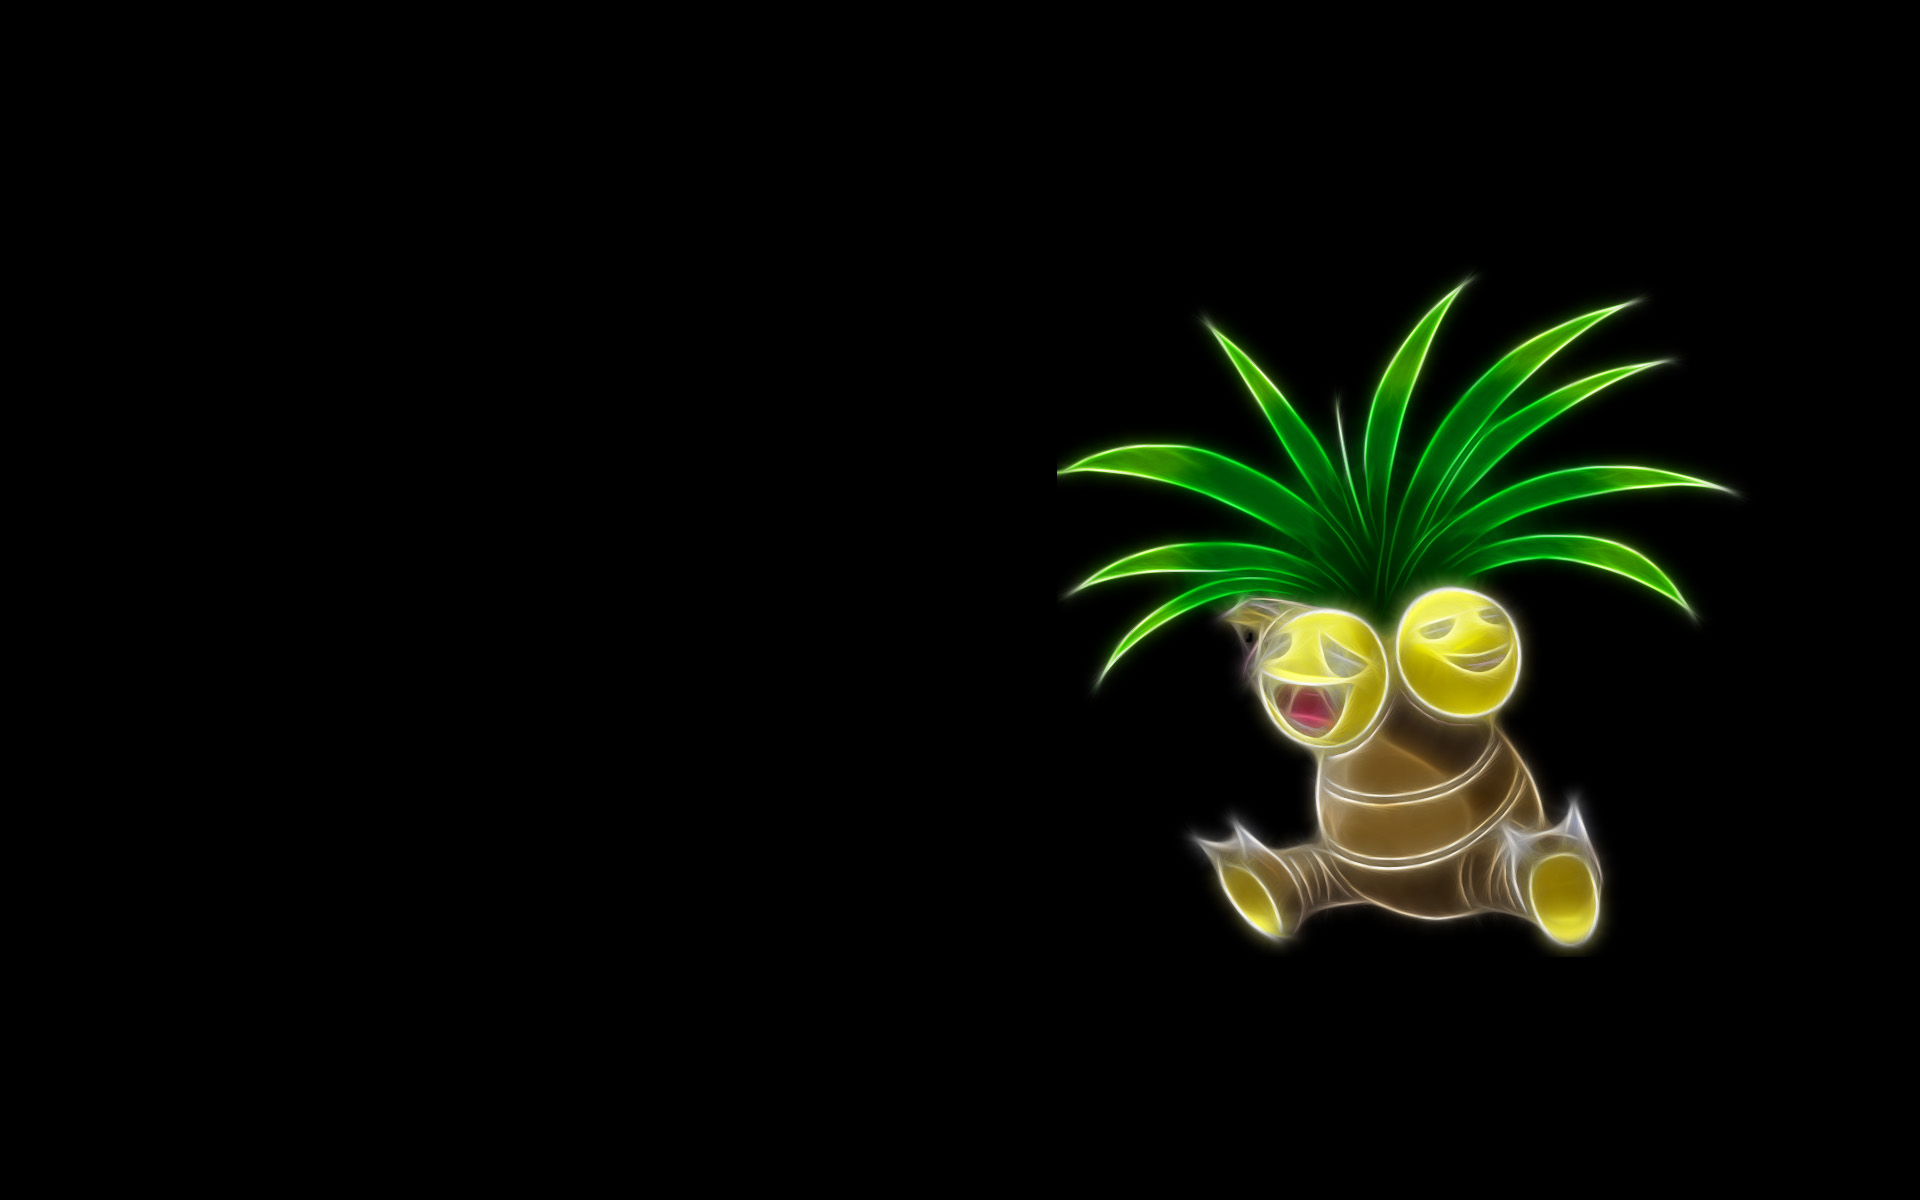 A lush and majestic Exeggutor Pokémon in a tranquil grassy setting.